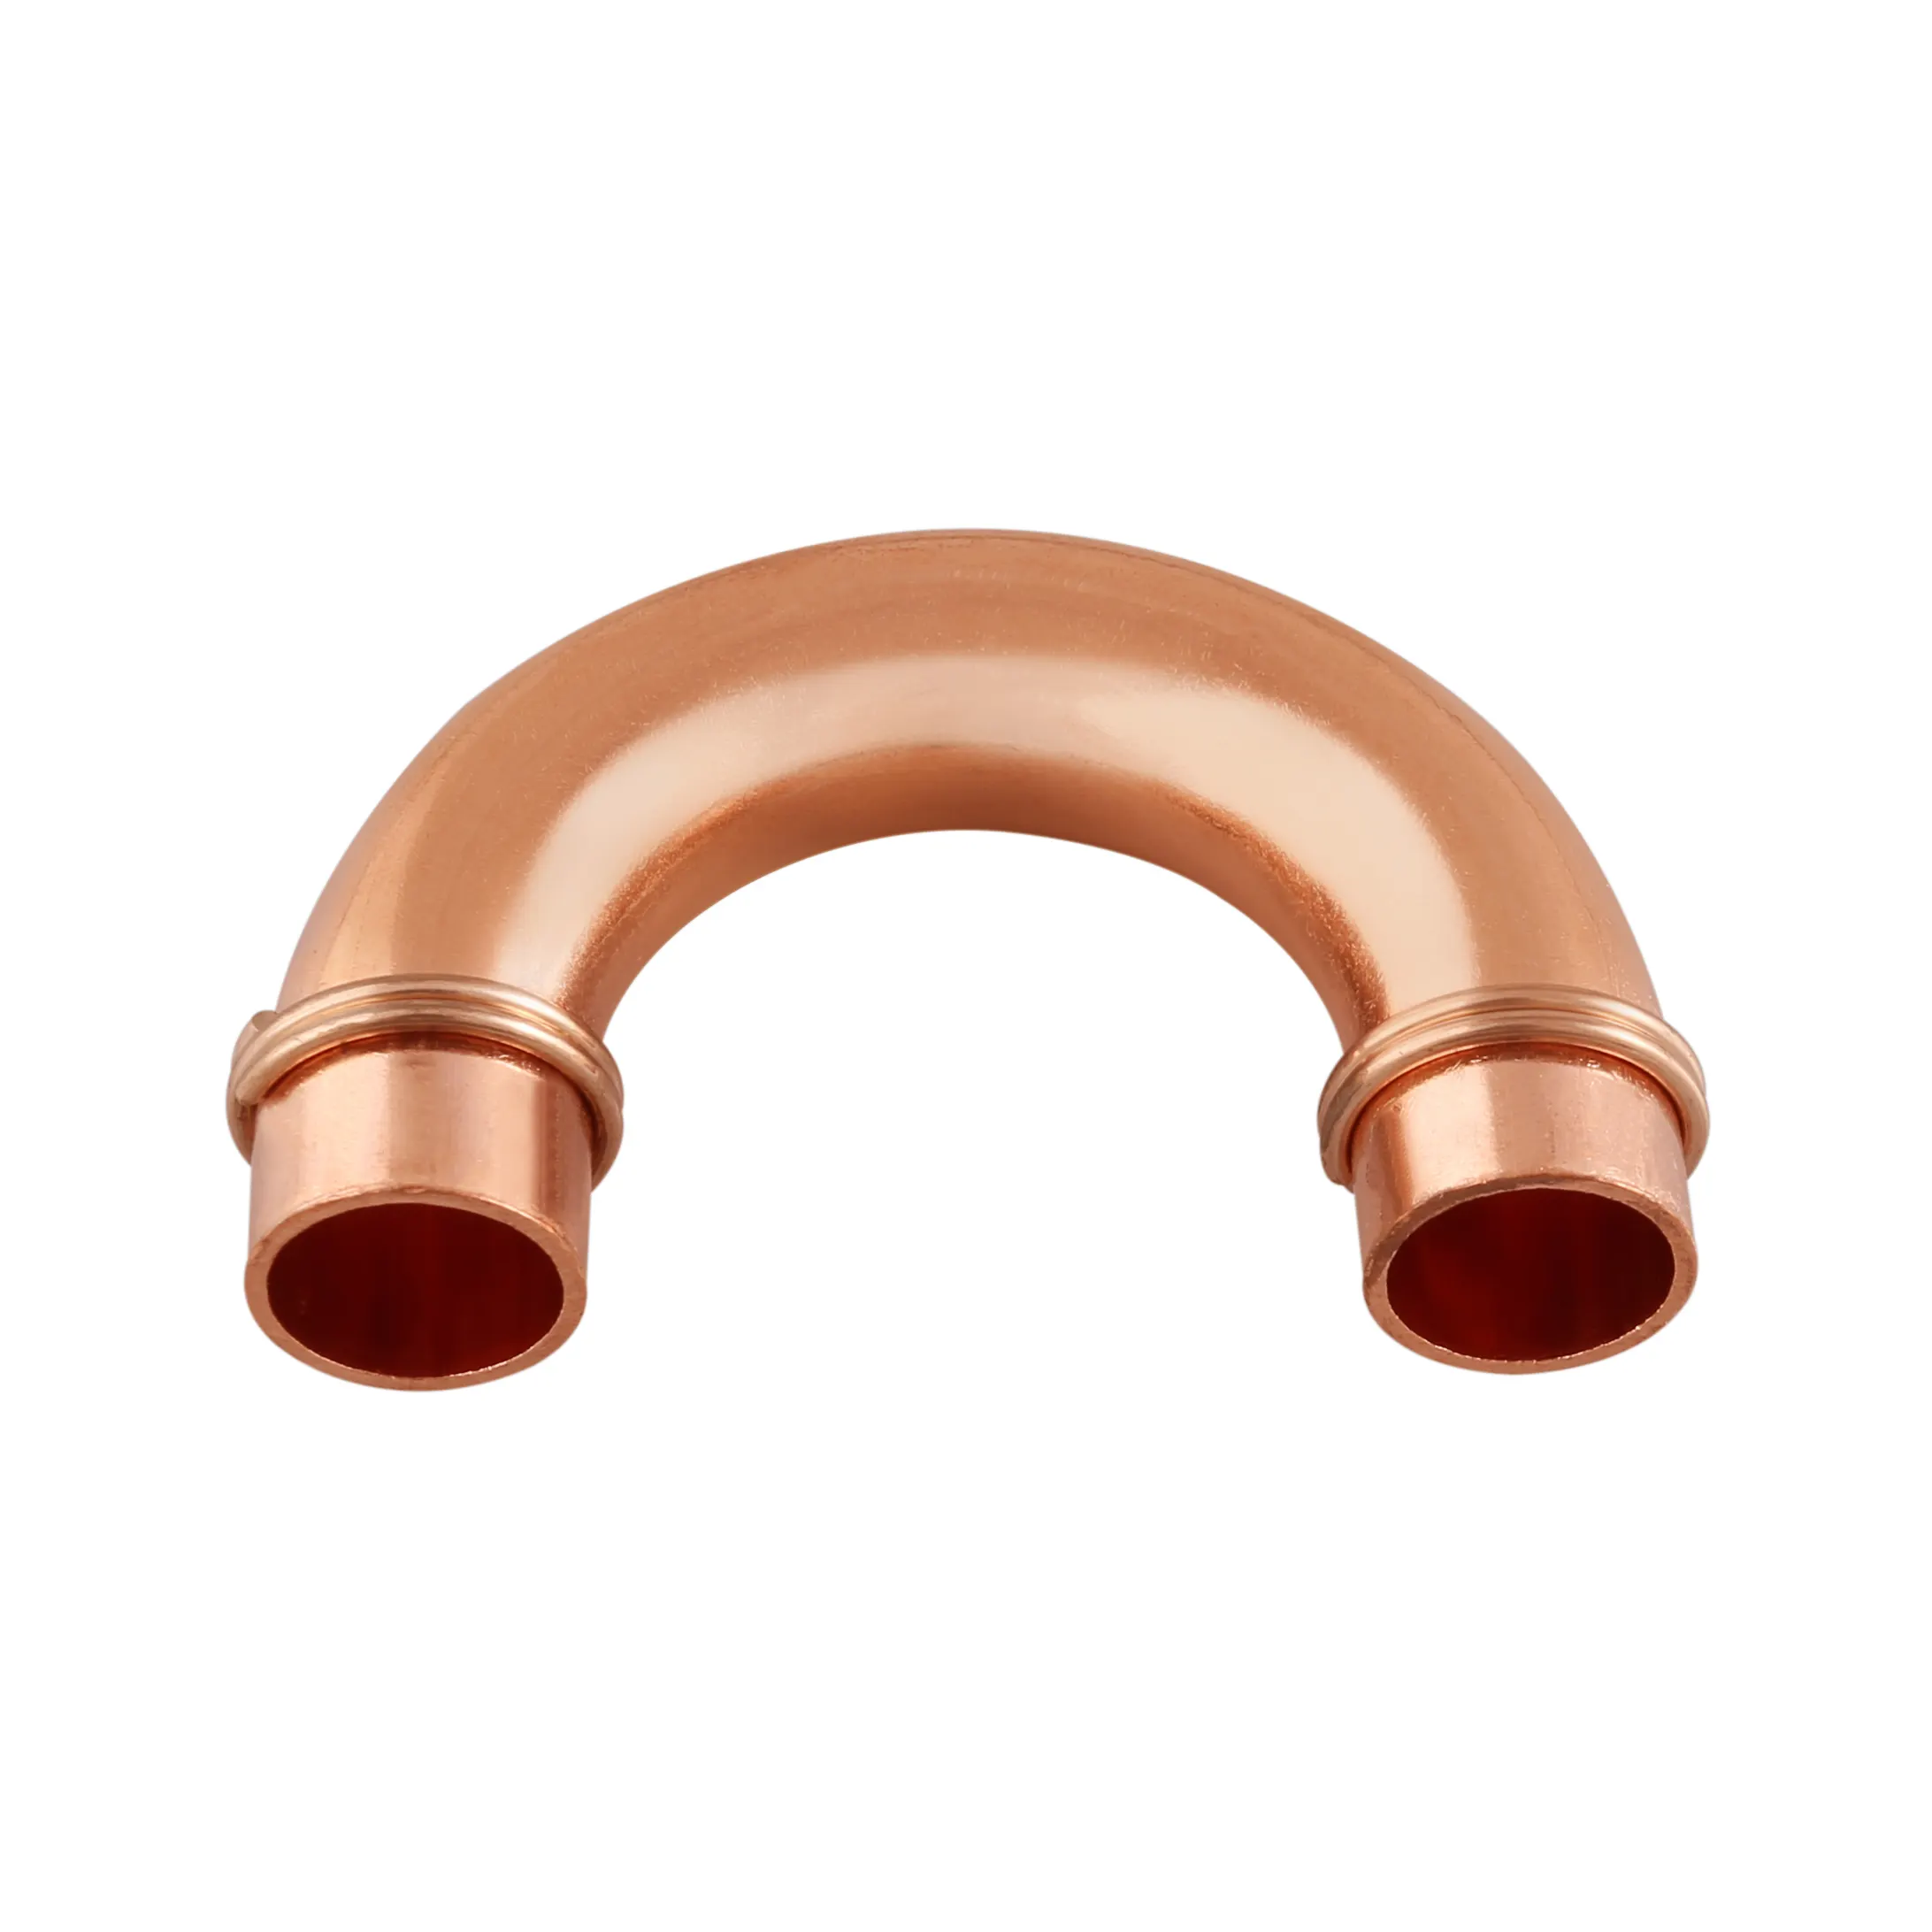 Hailiang Air Conditioner Refrigeration Copper Pipe Fittings 180 Degree Elbow U Bend